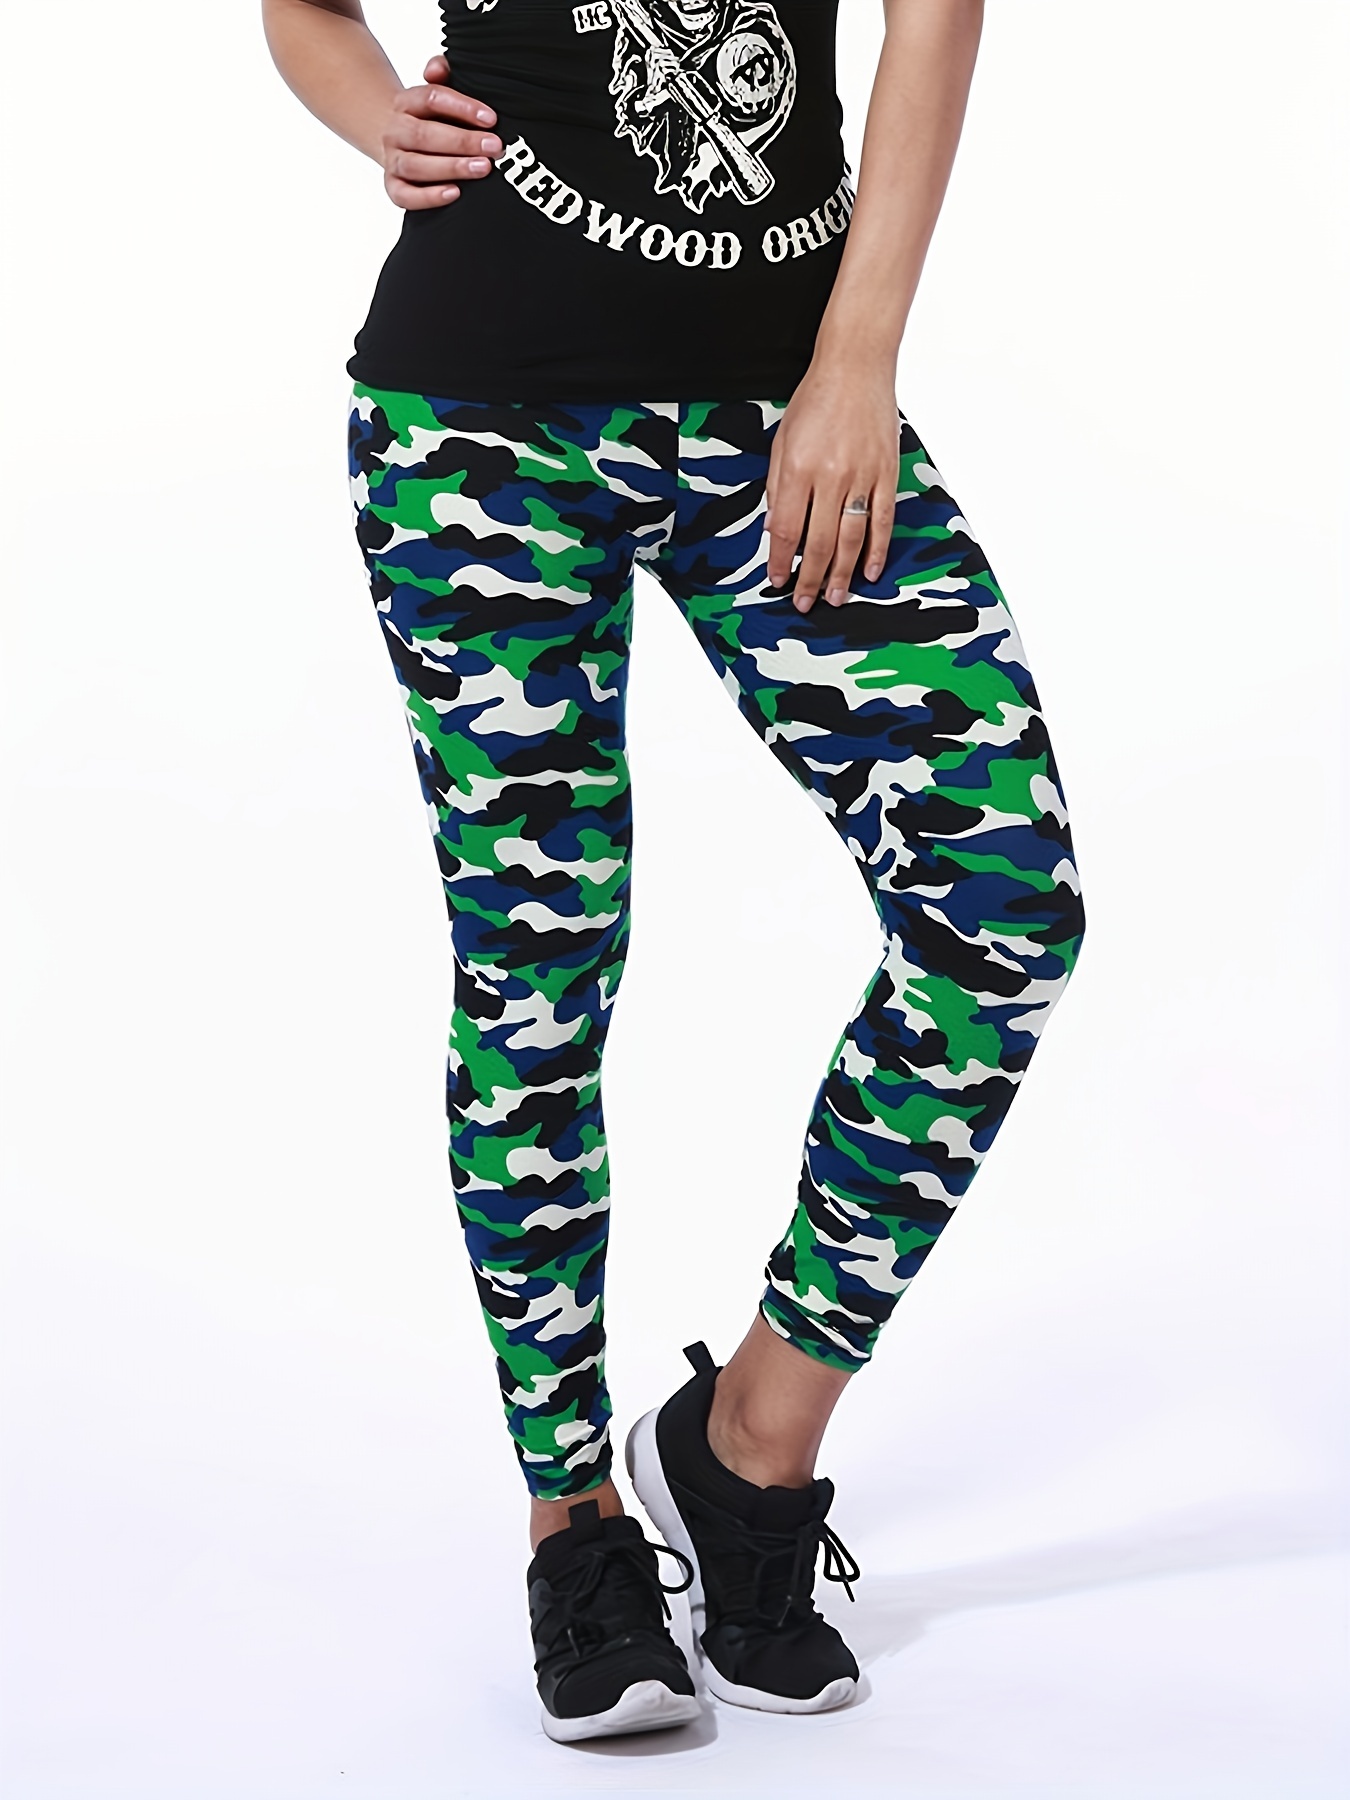 High Waist Blue Tundra Camo Print Leggings - Plus Size APH2988-P-ArmyPrint  - Stages West